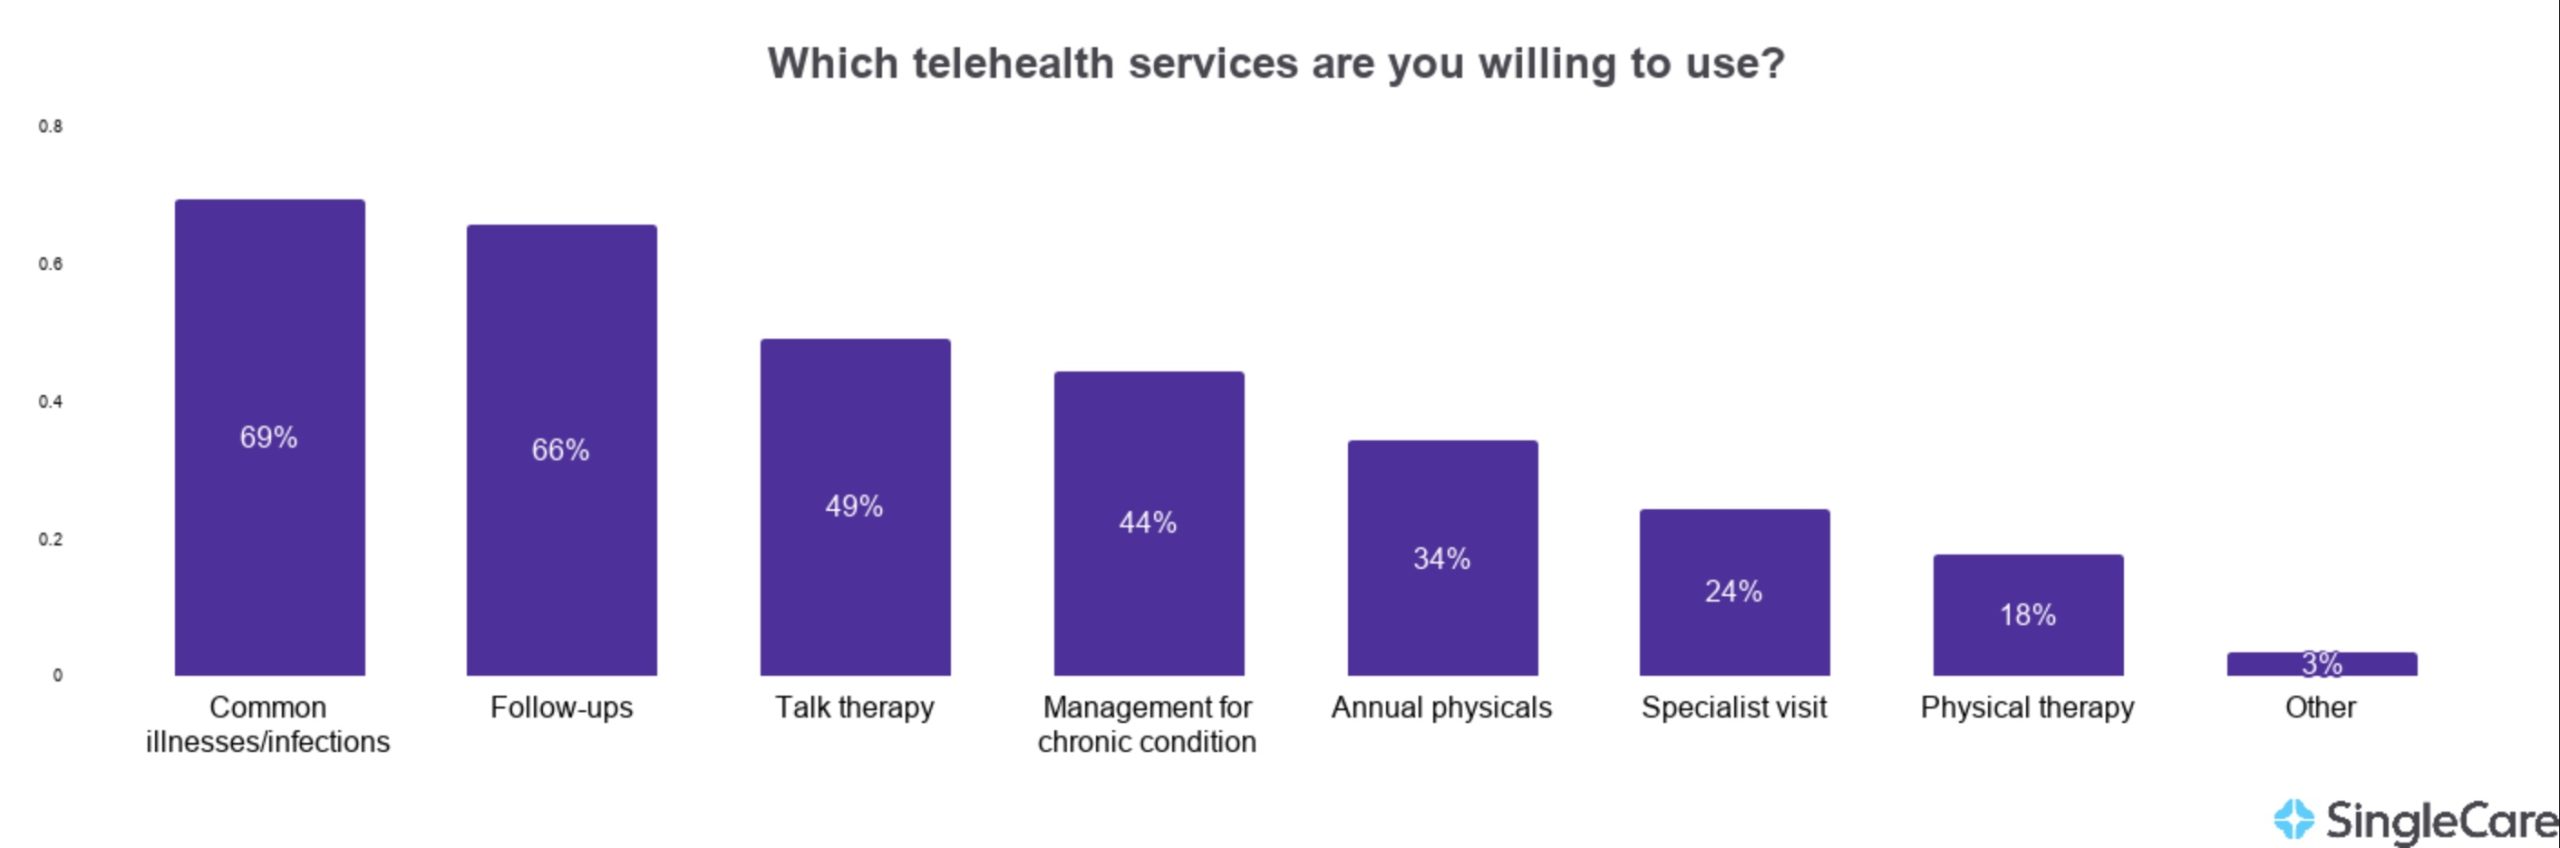 Telehealth services patients are willing to use.